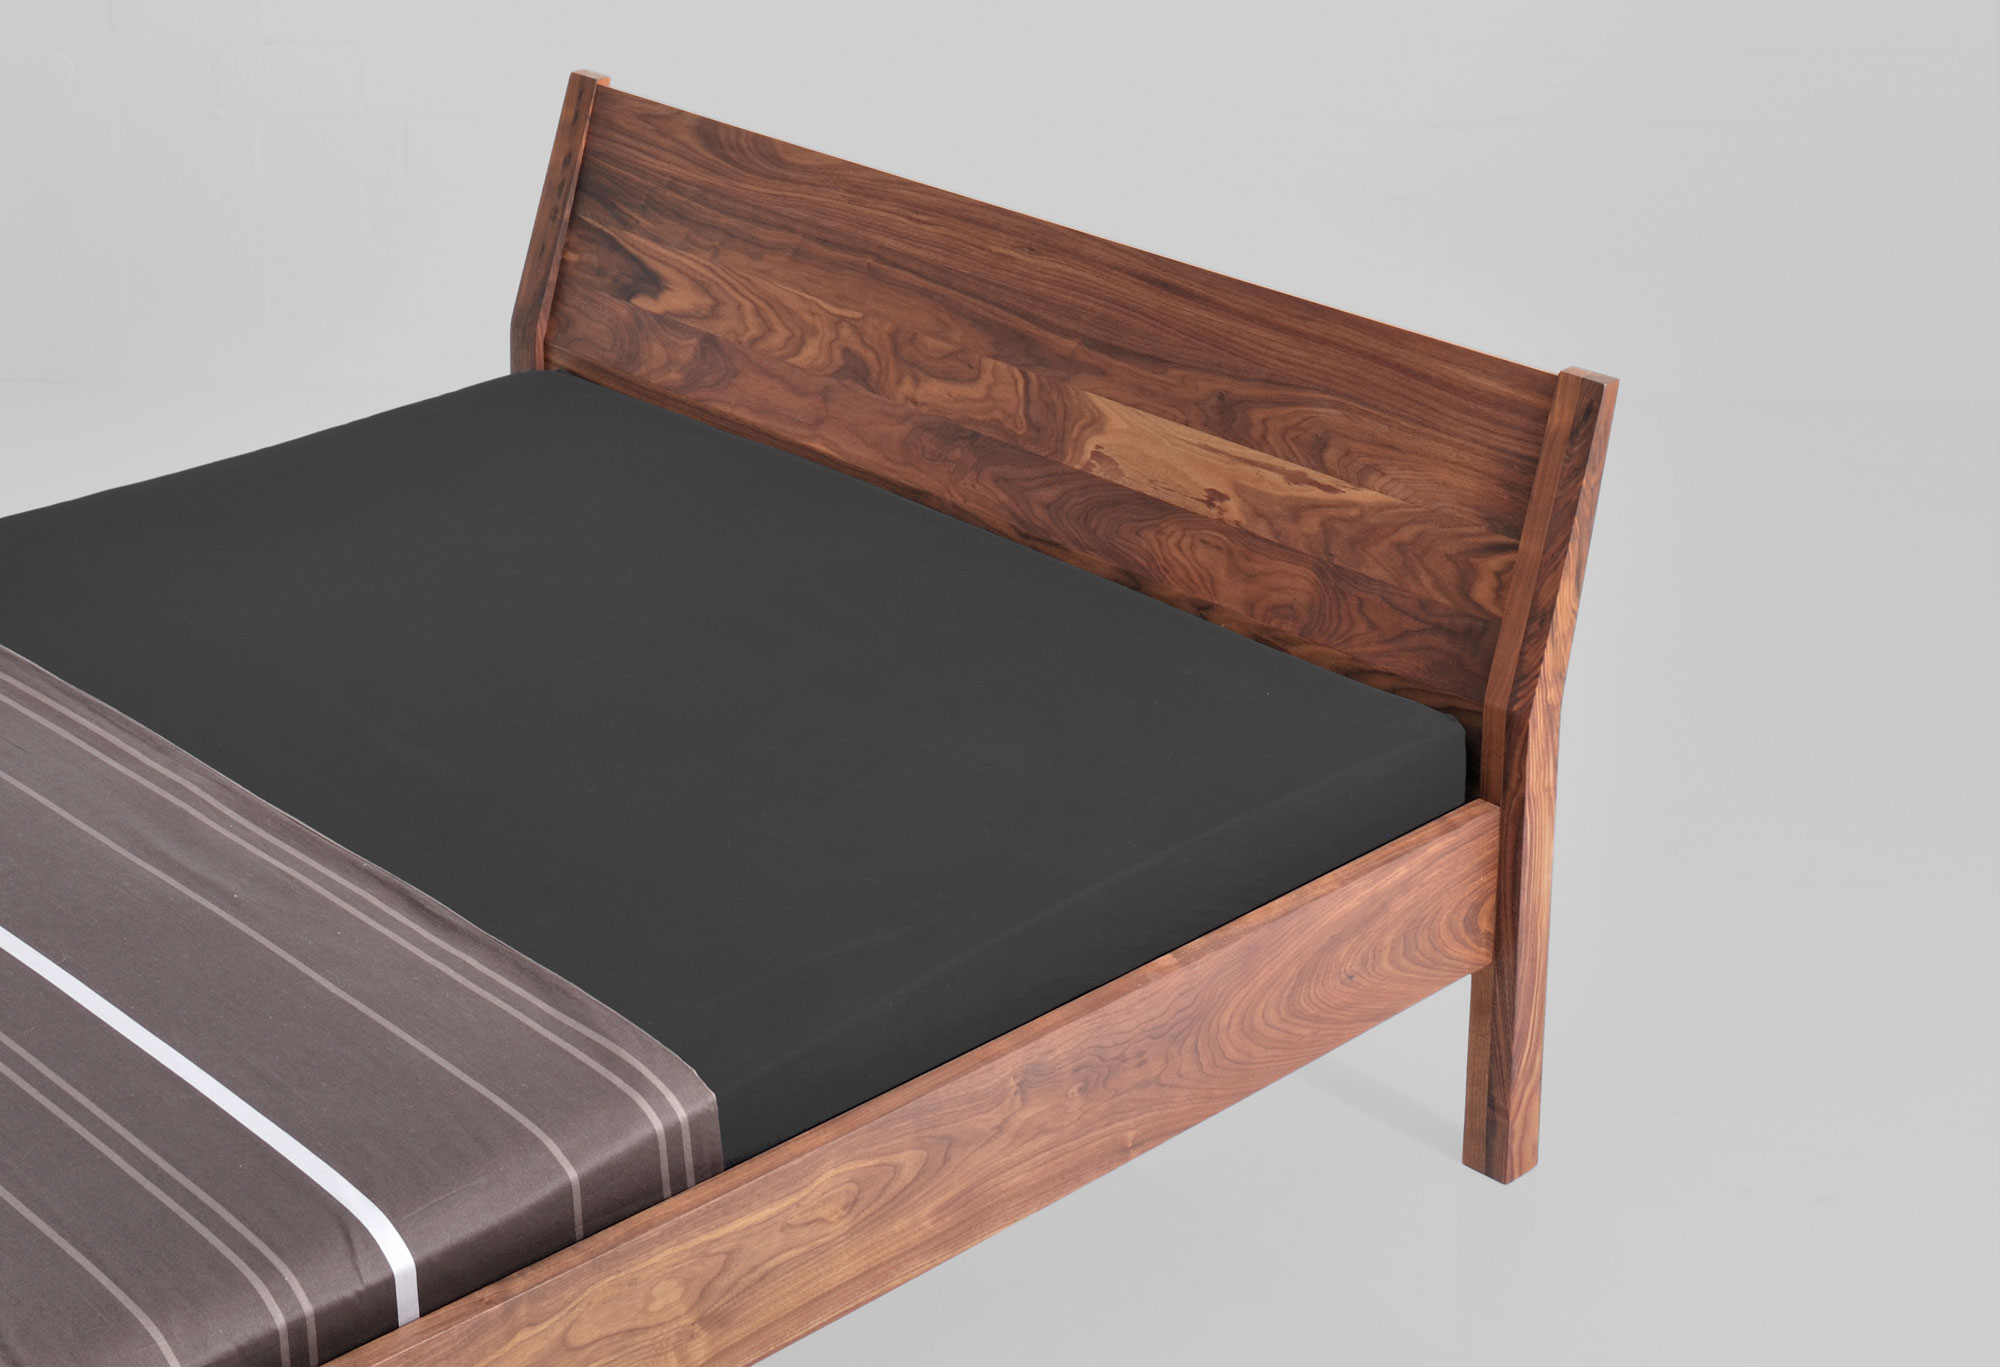 Wooden Bed VILLA 2847a custom made in solid wood by vitamin design